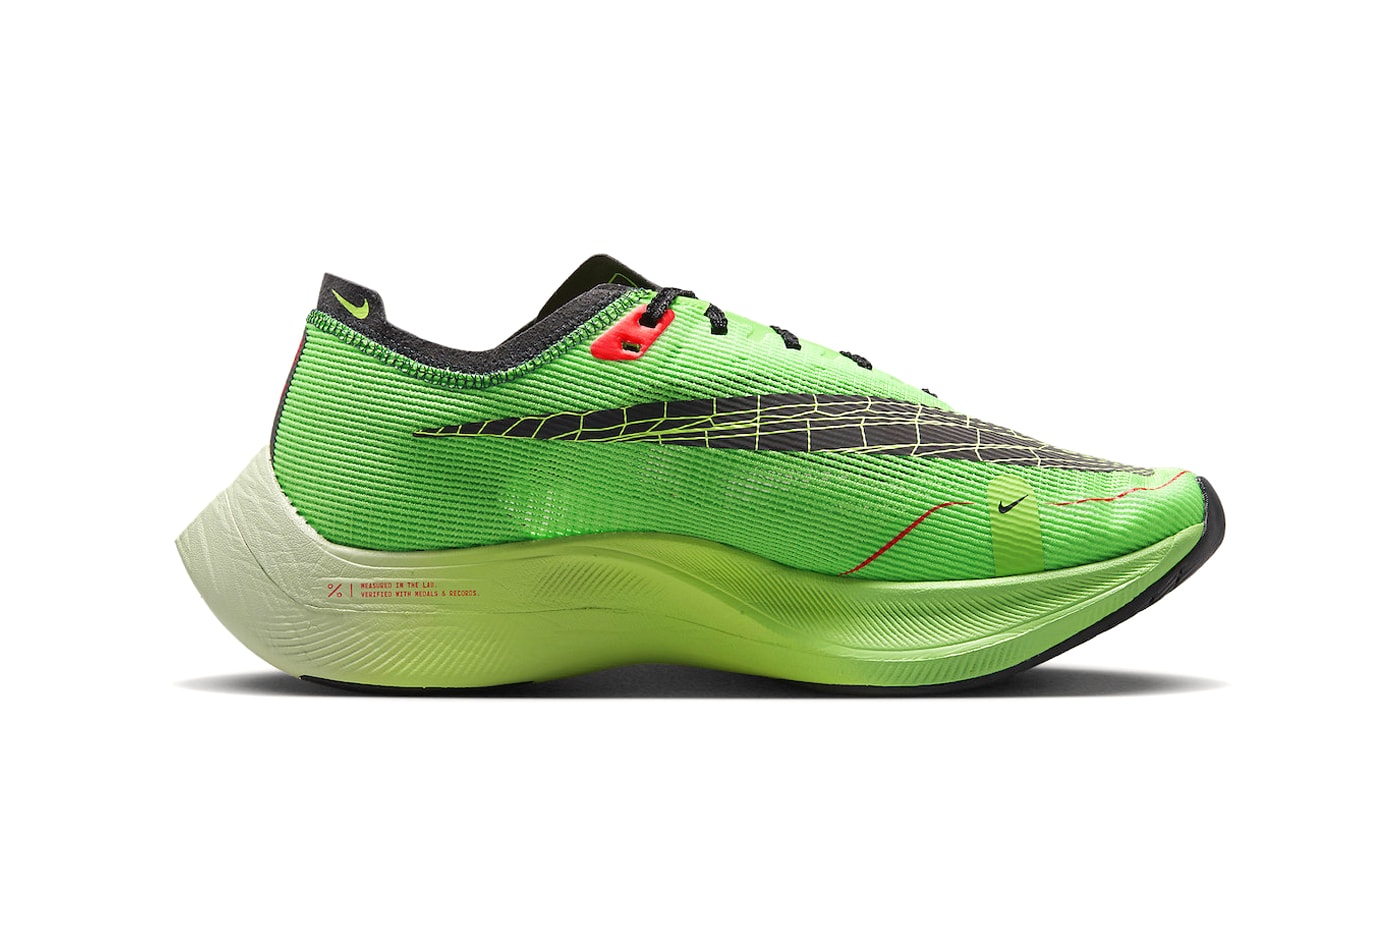 Nike ZoomX Vaporfly next percent 2 ekiden japan grinch green red black release info date price